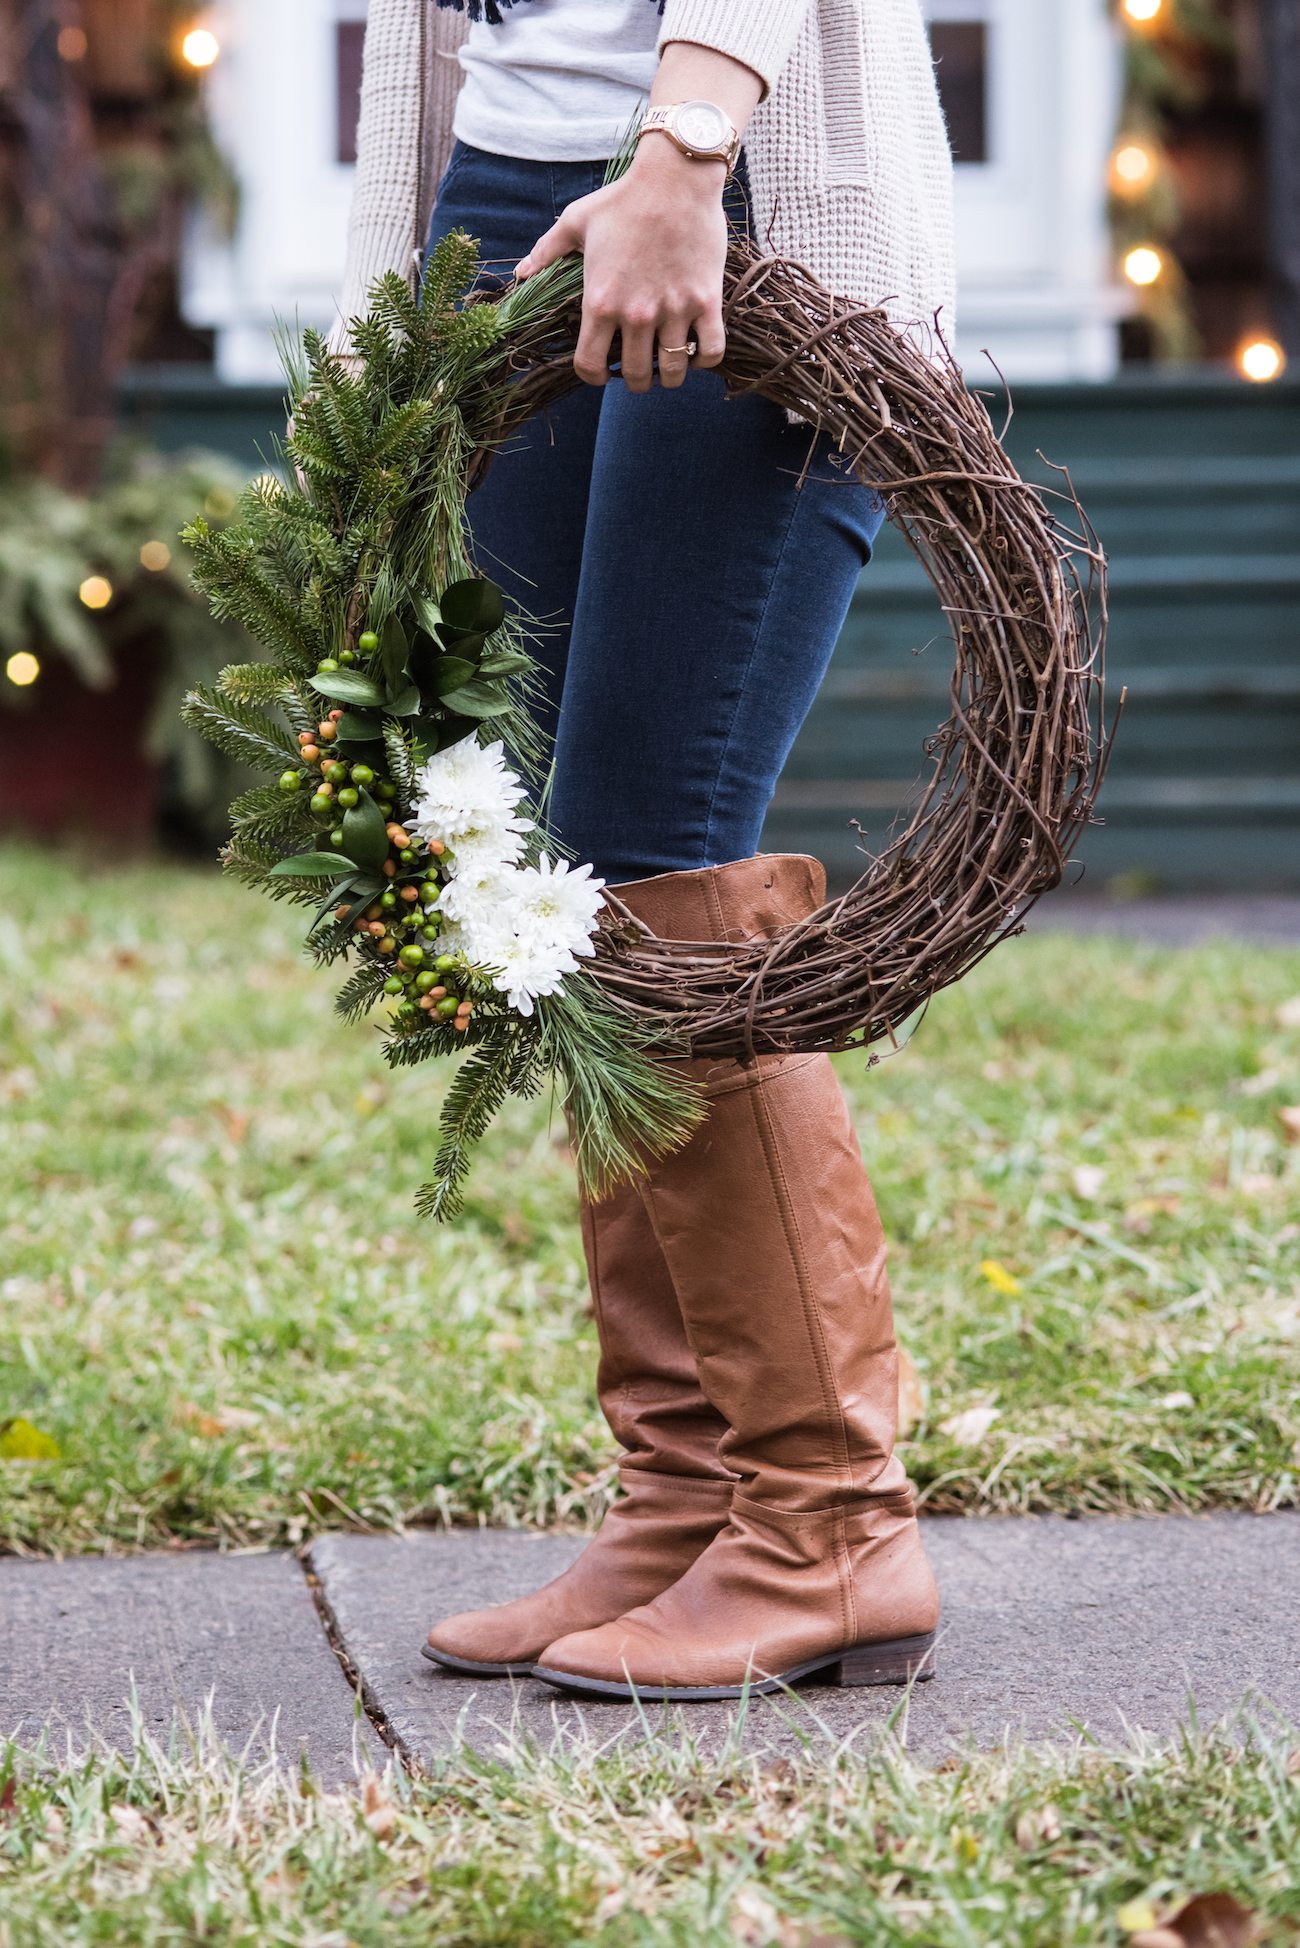 DIY Natural Winter Wreath | Homemade Christmas decor, entertaining tips, party ideas and winter decorating ideas from @cydconverse